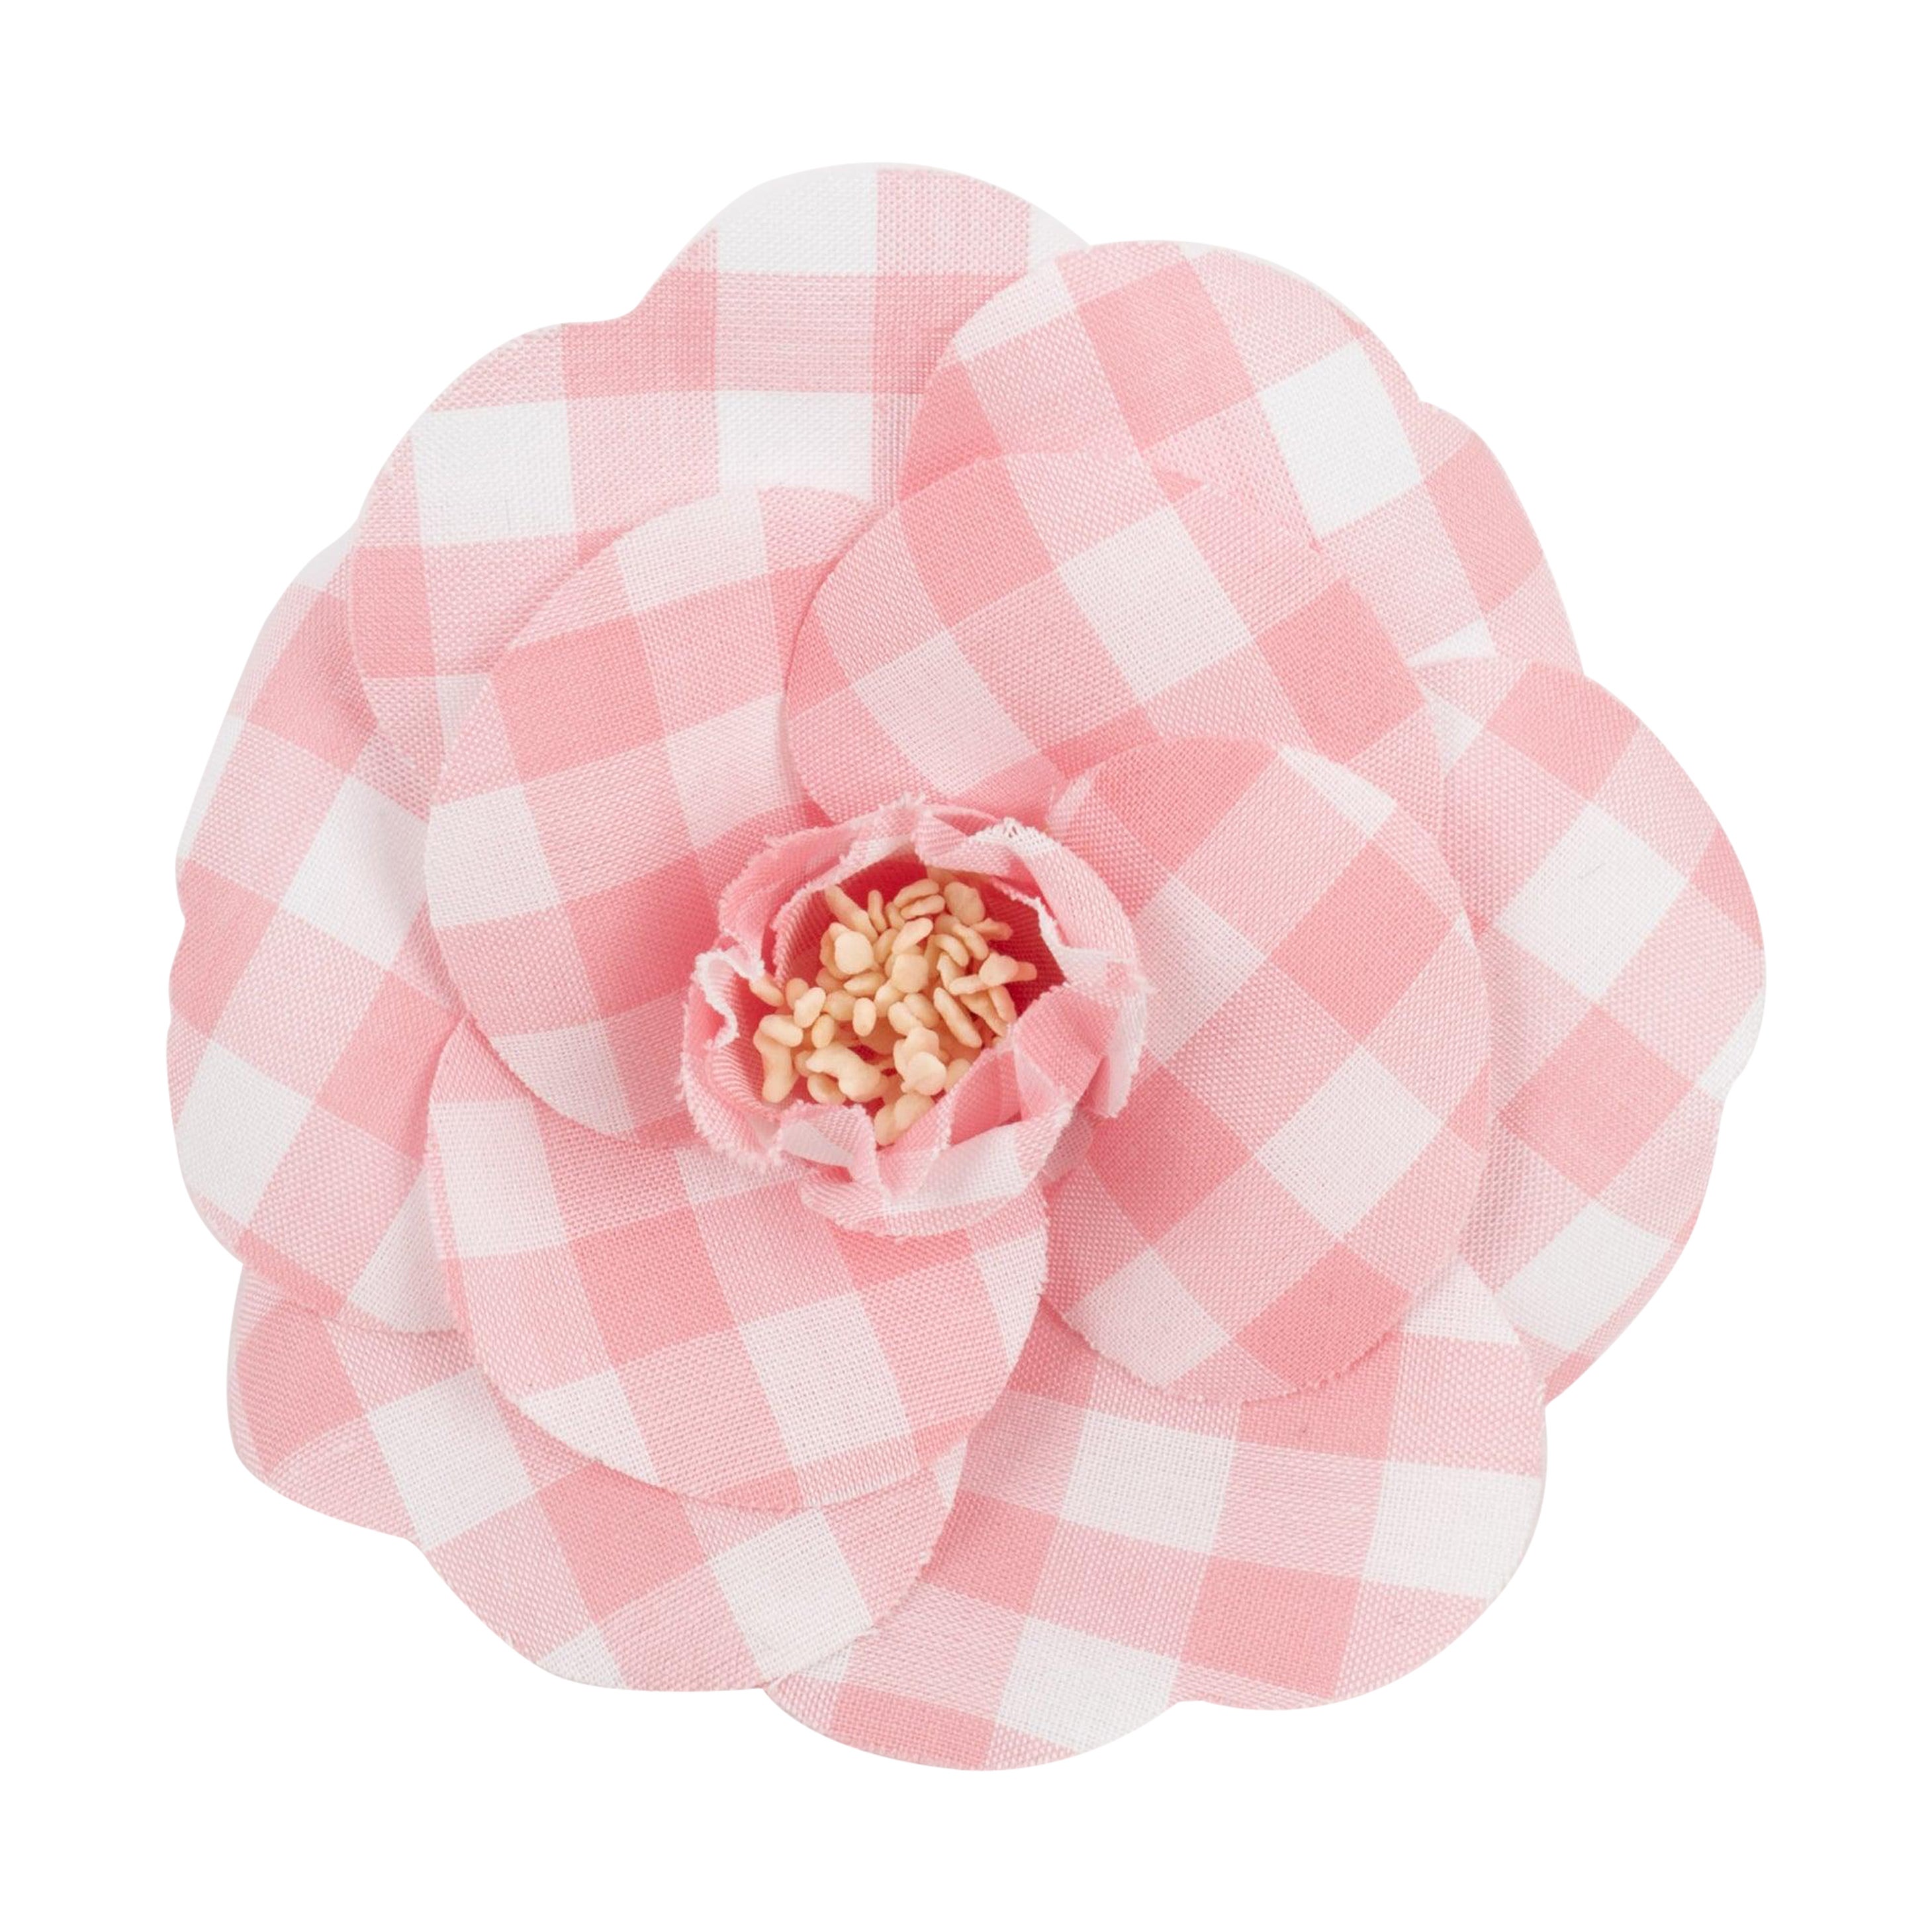 Chanel Brooch Camellia Made of Pink and White Gingham Fabric, 1990s For Sale